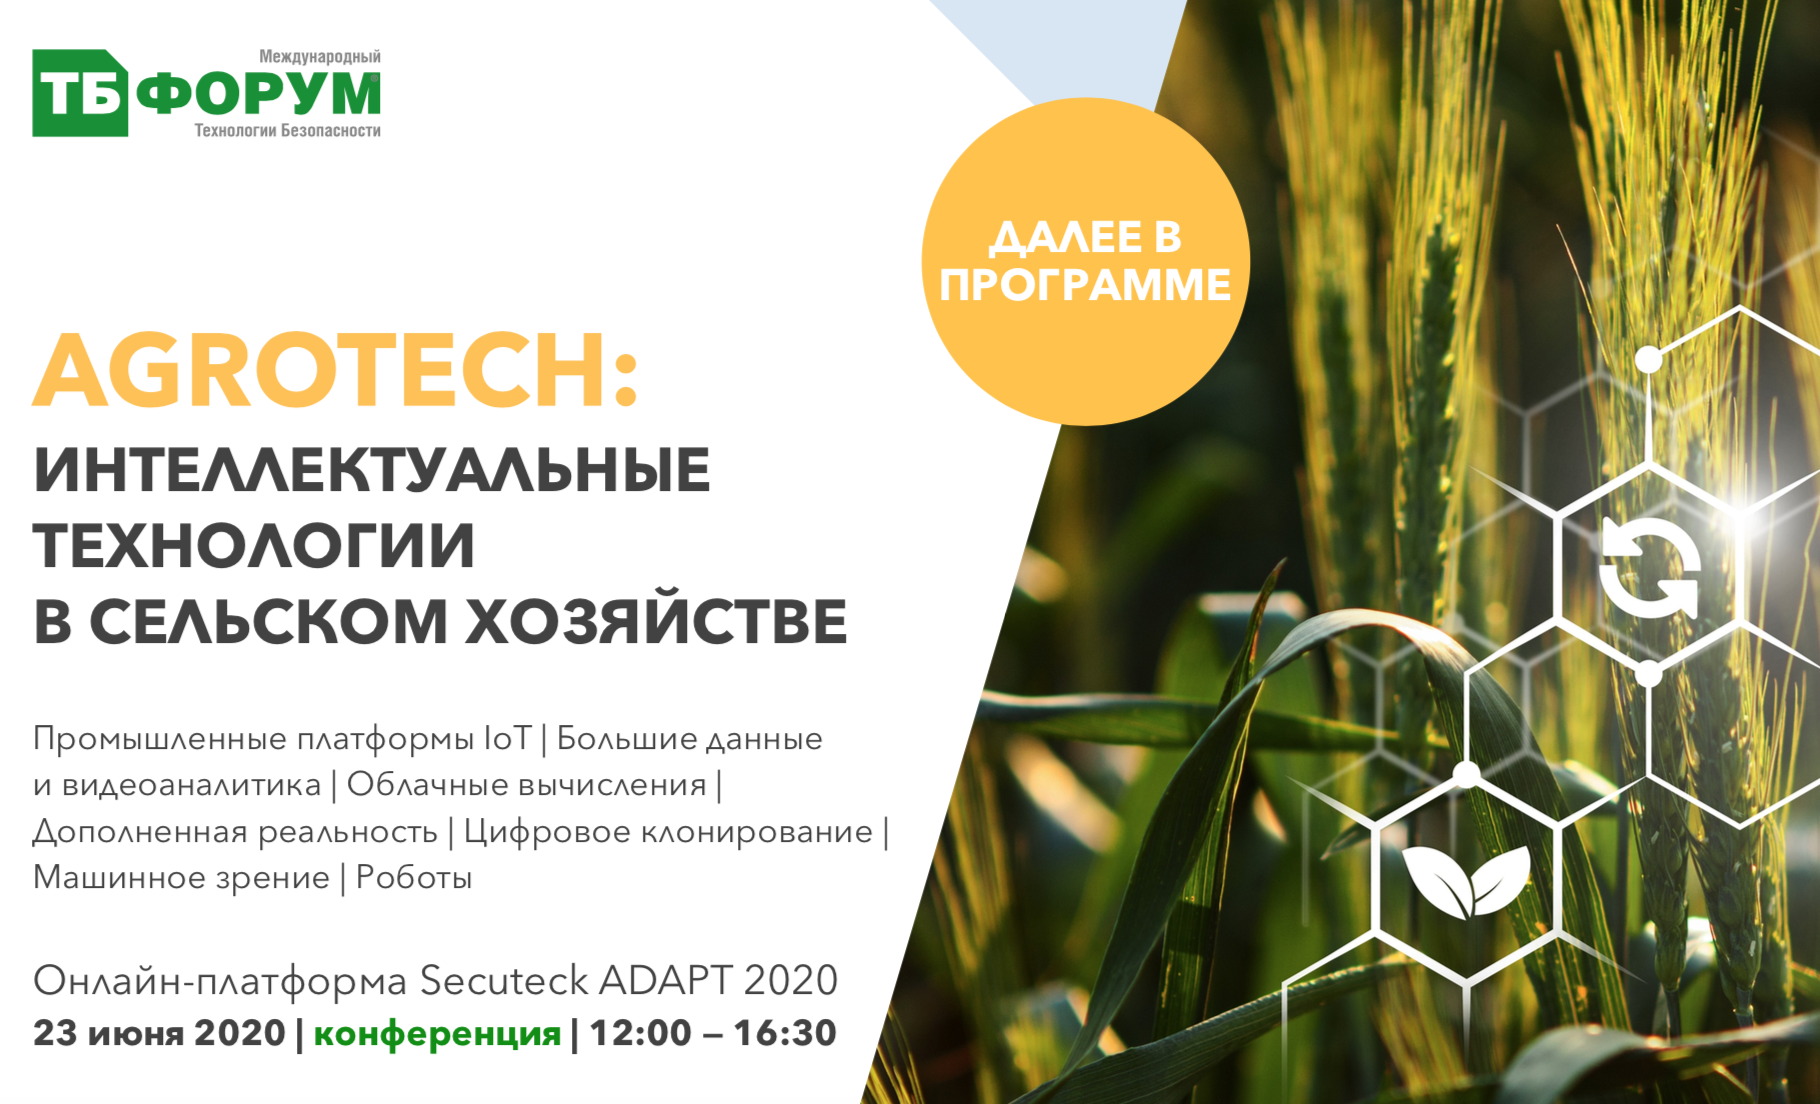 AgroTech conference